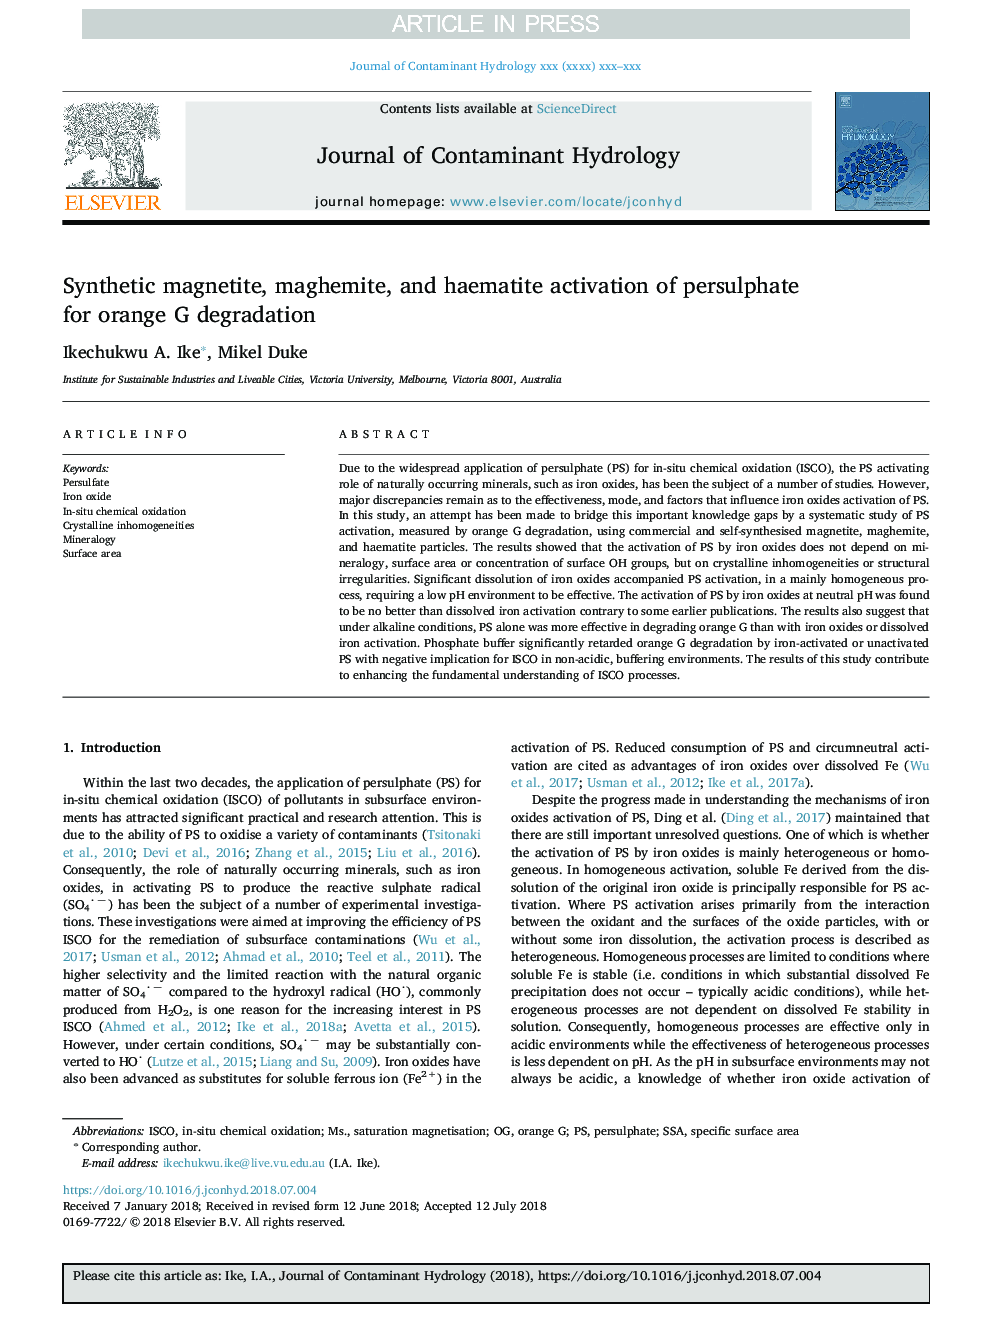 Synthetic magnetite, maghemite, and haematite activation of persulphate for orange G degradation